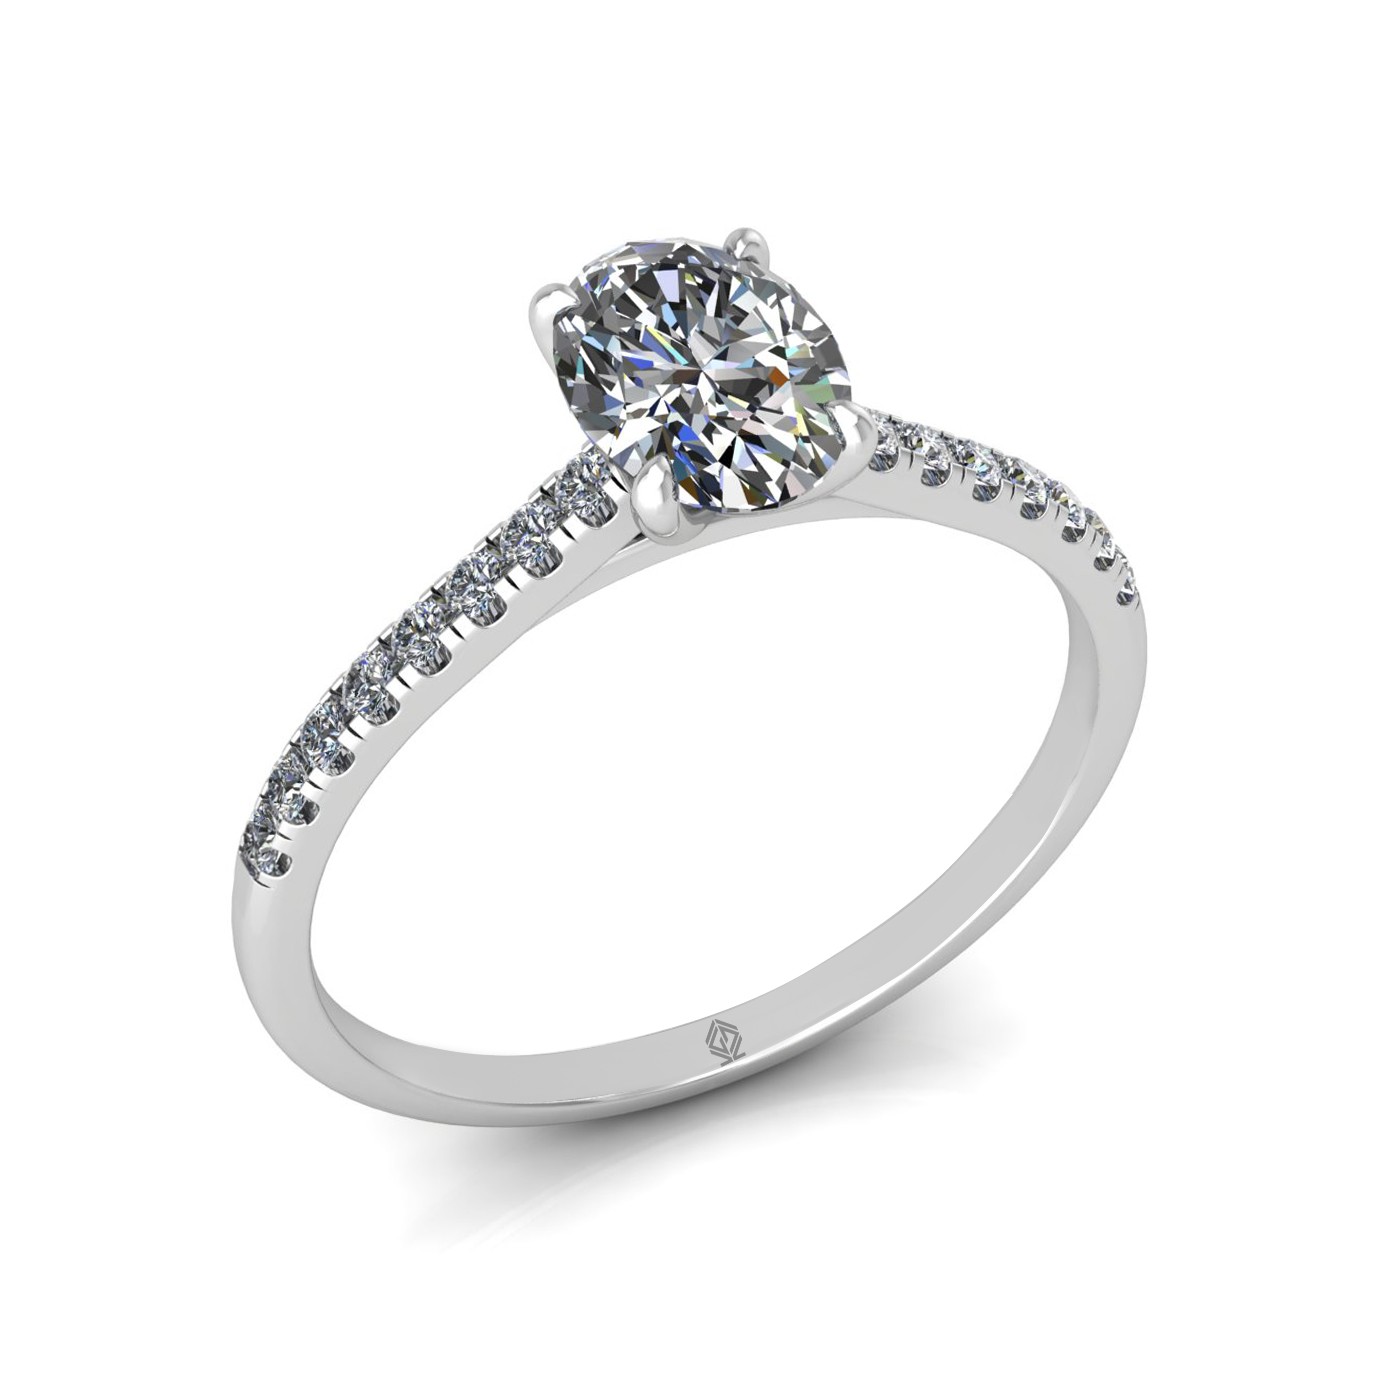 18k white gold  0,80 ct 4 prongs oval cut diamond engagement ring with whisper thin pavÉ set band